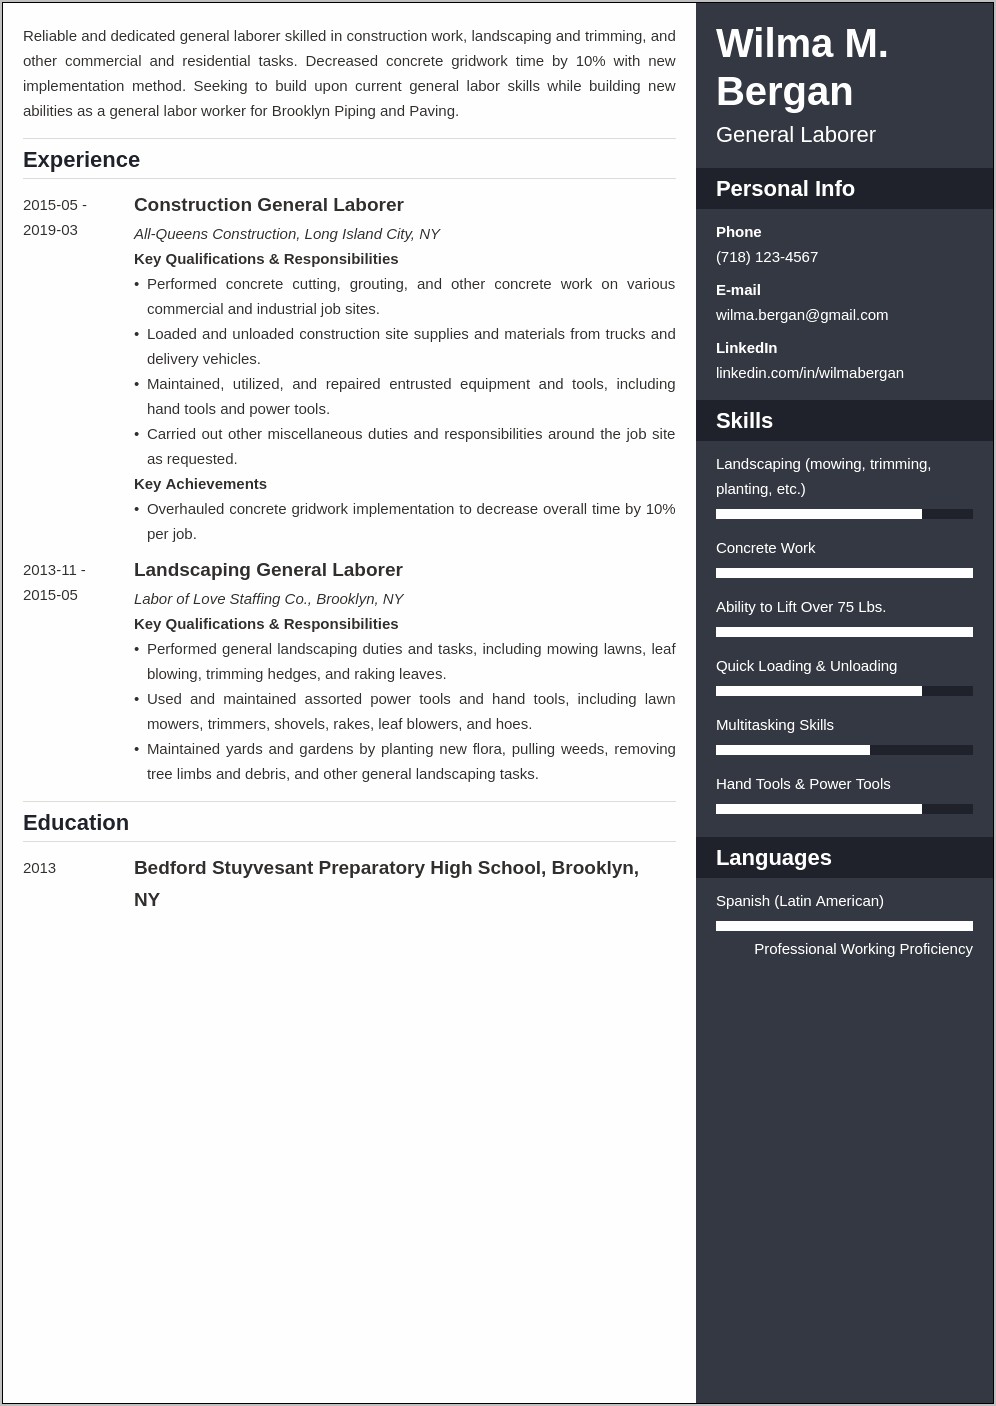 Resume Objective For Labor Work